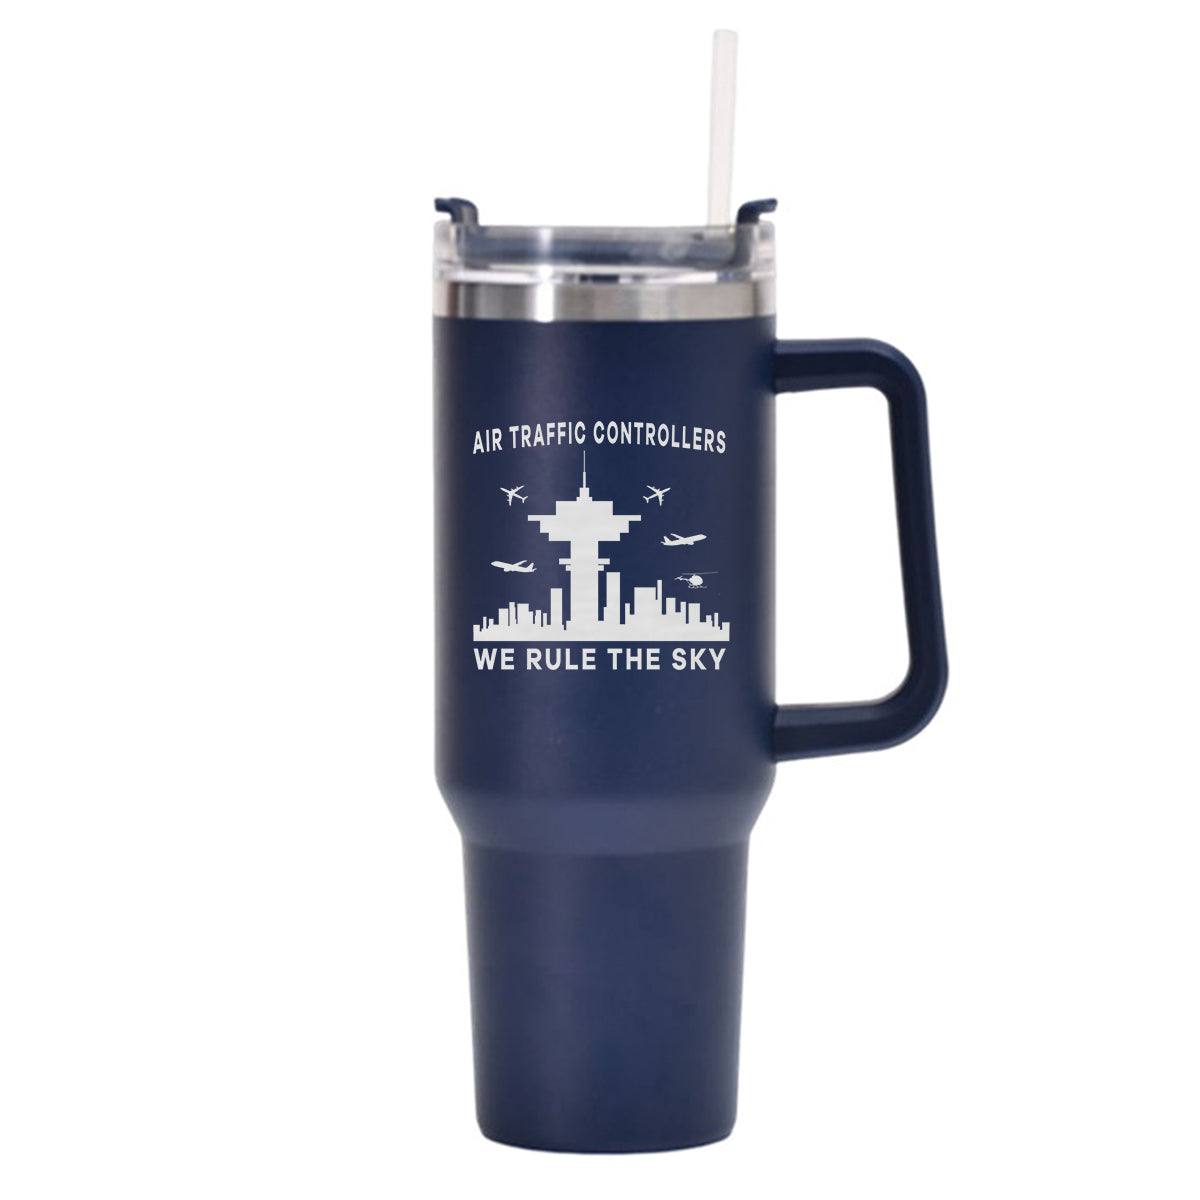 Air Traffic Controllers - We Rule The Sky Designed 40oz Stainless Steel Car Mug With Holder